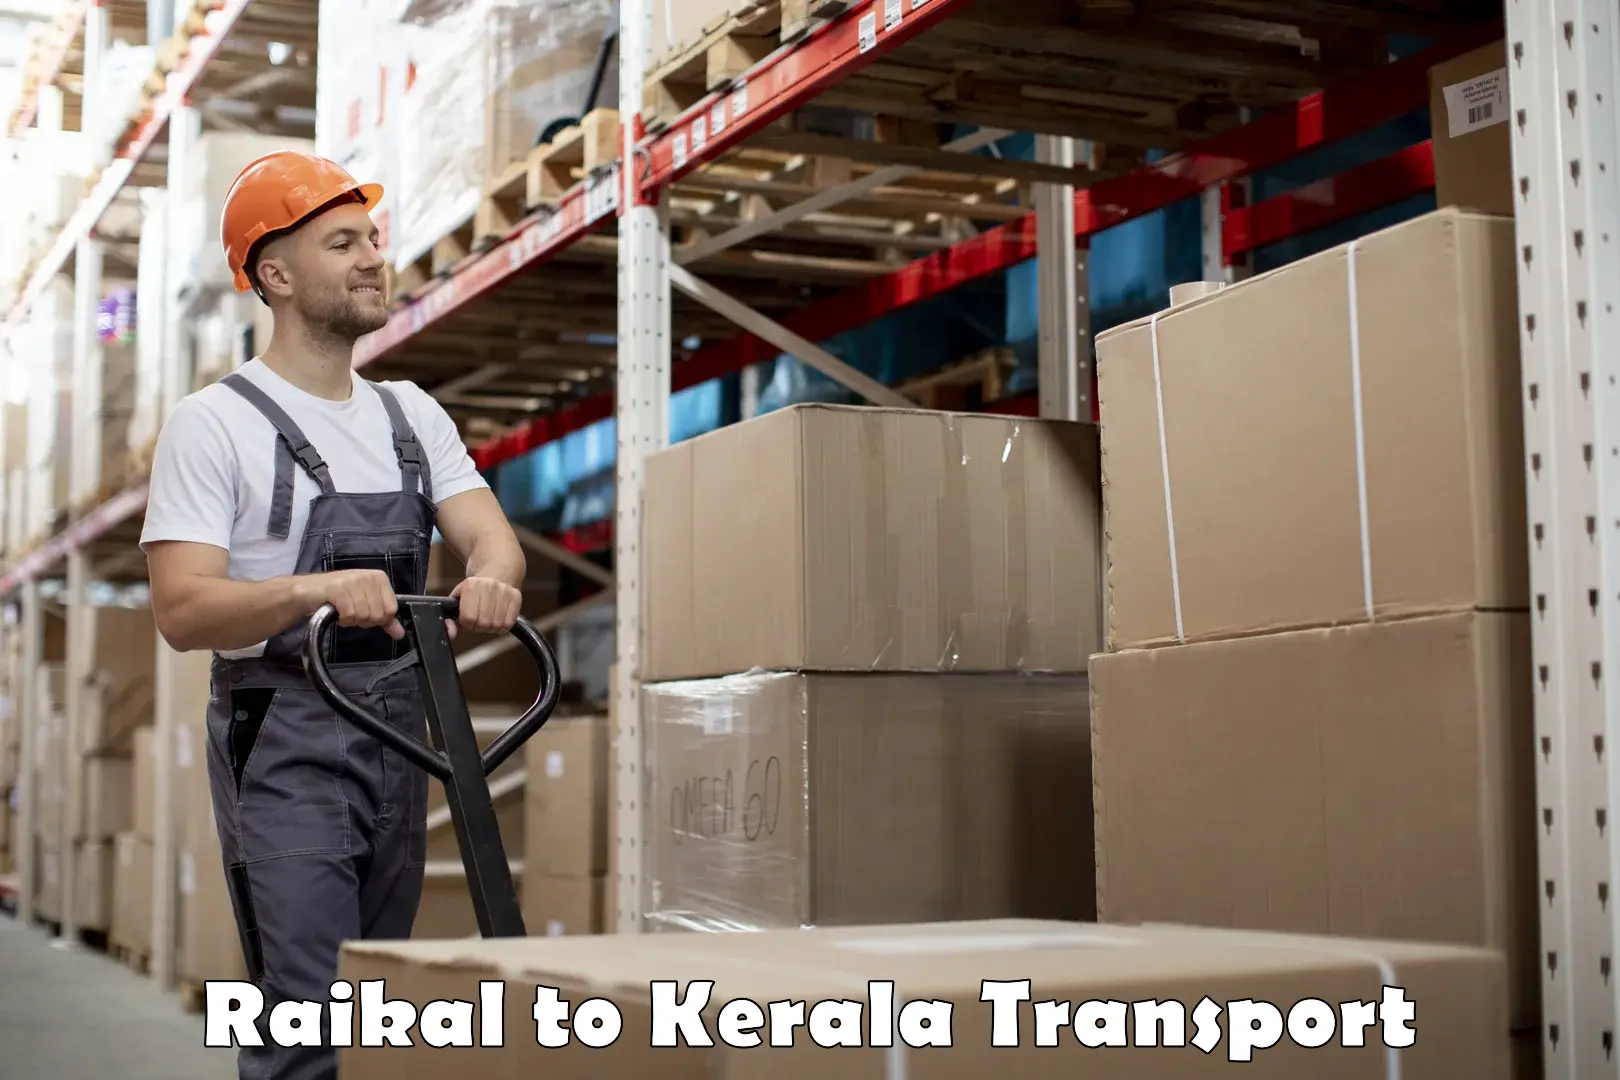 Express transport services Raikal to Cochin University of Science and Technology